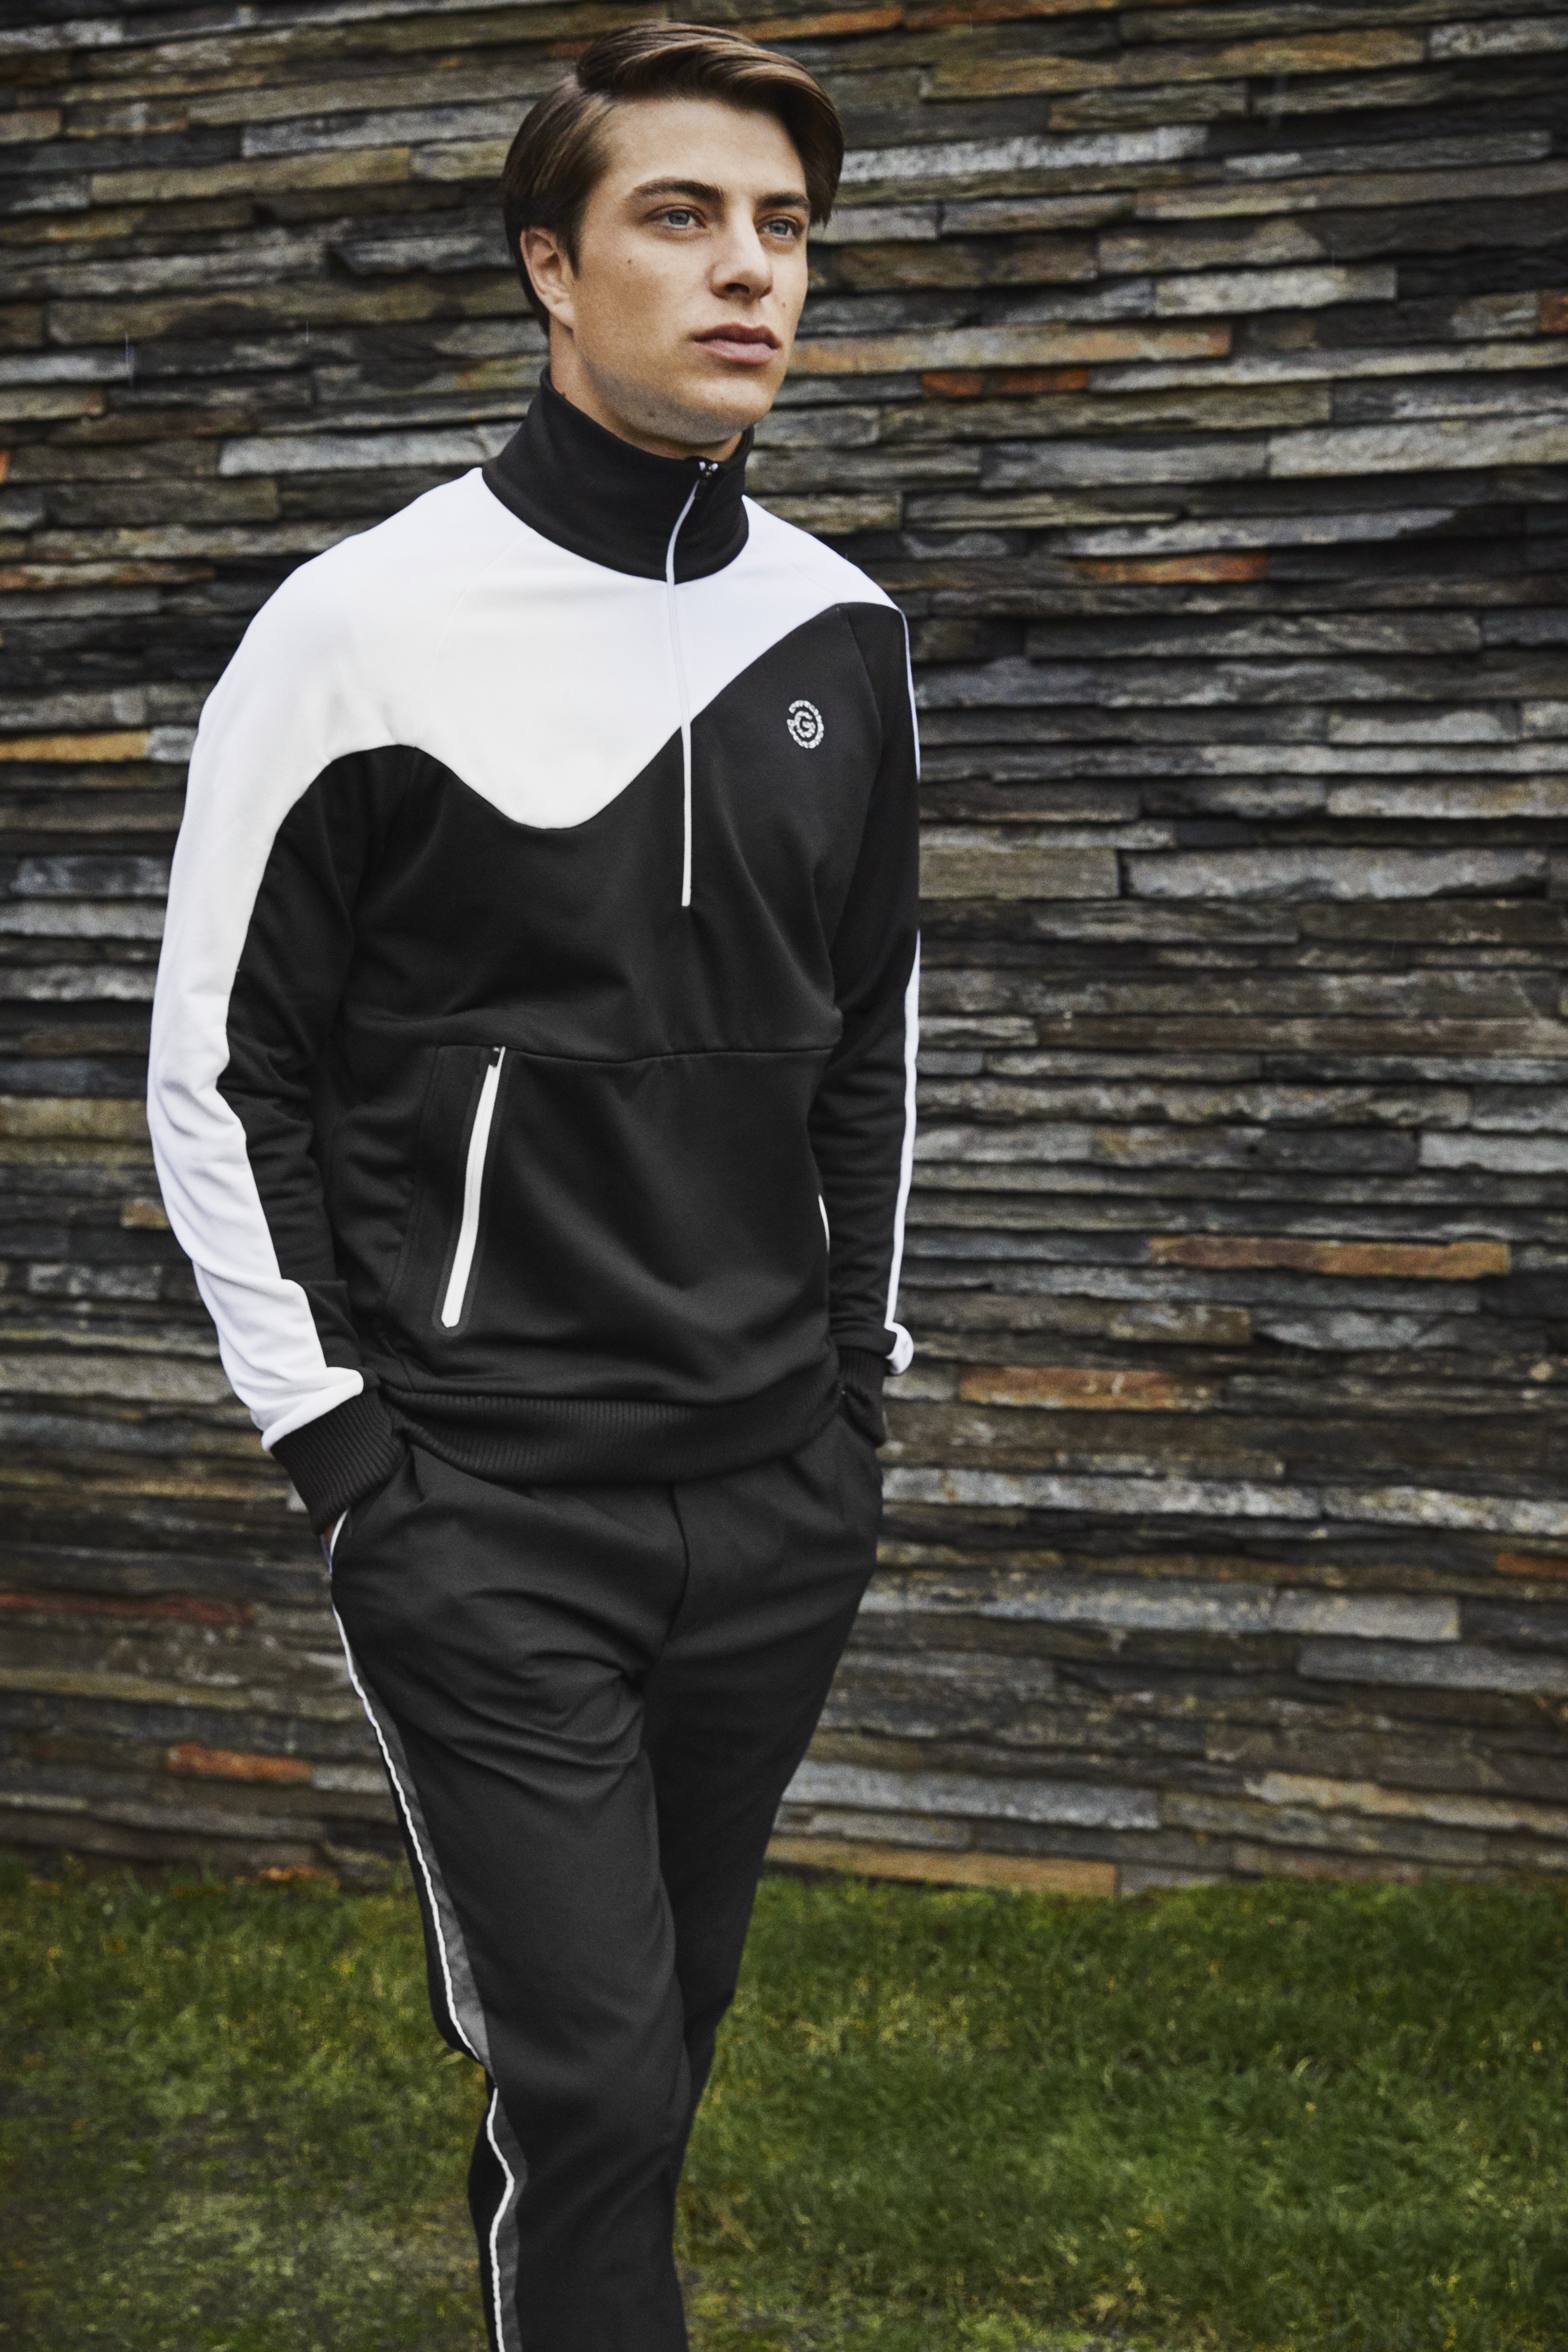 EXCLUSIVE! Niall Horan talks to GM about Modest! Golf and Galvin Green